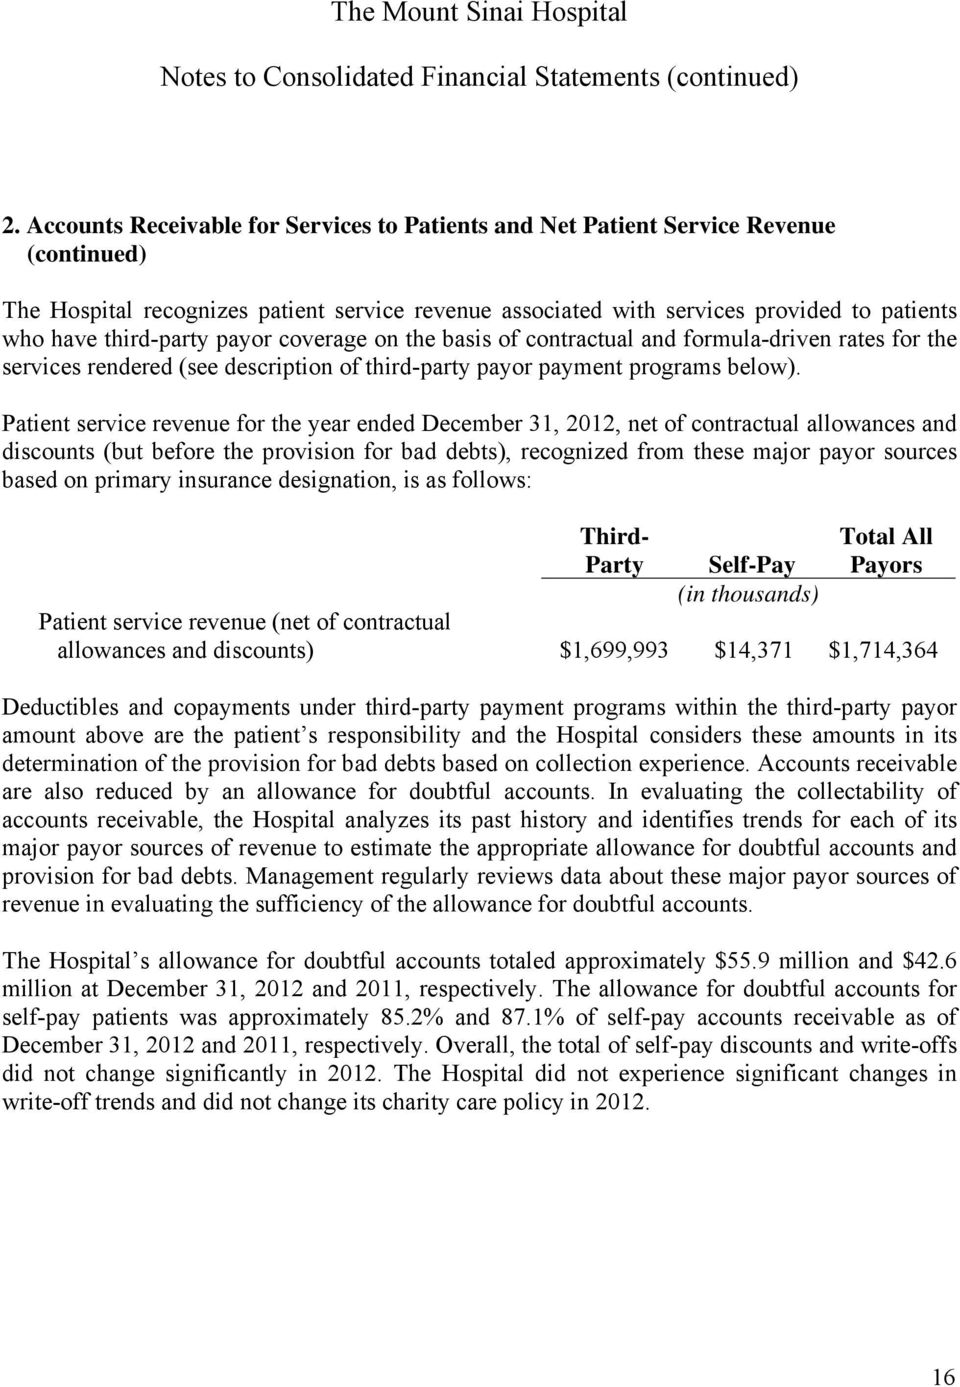 Patient service revenue for the year ended December 31, 2012, net of contractual allowances and discounts (but before the provision for bad debts), recognized from these major payor sources based on